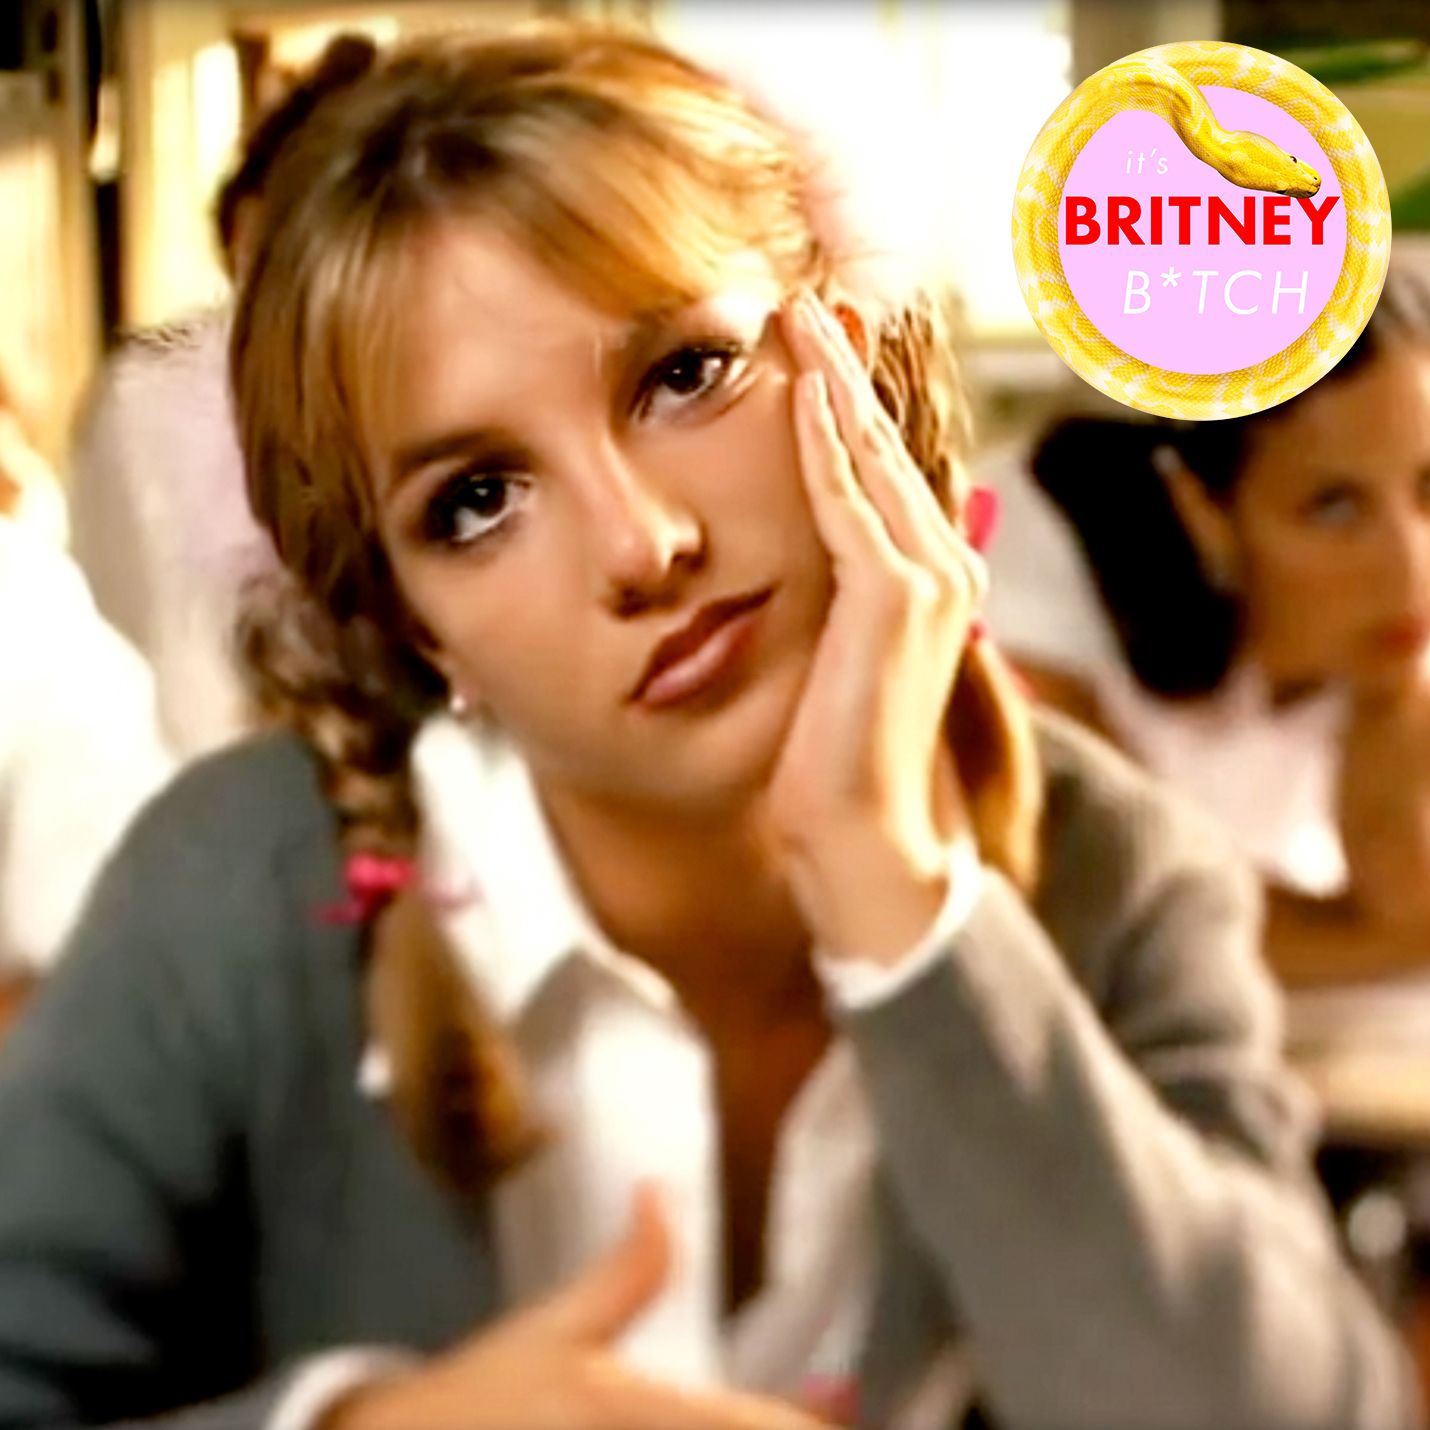 Britney Spears One Time' Lyrics, Explained Baby One More Time Meaning